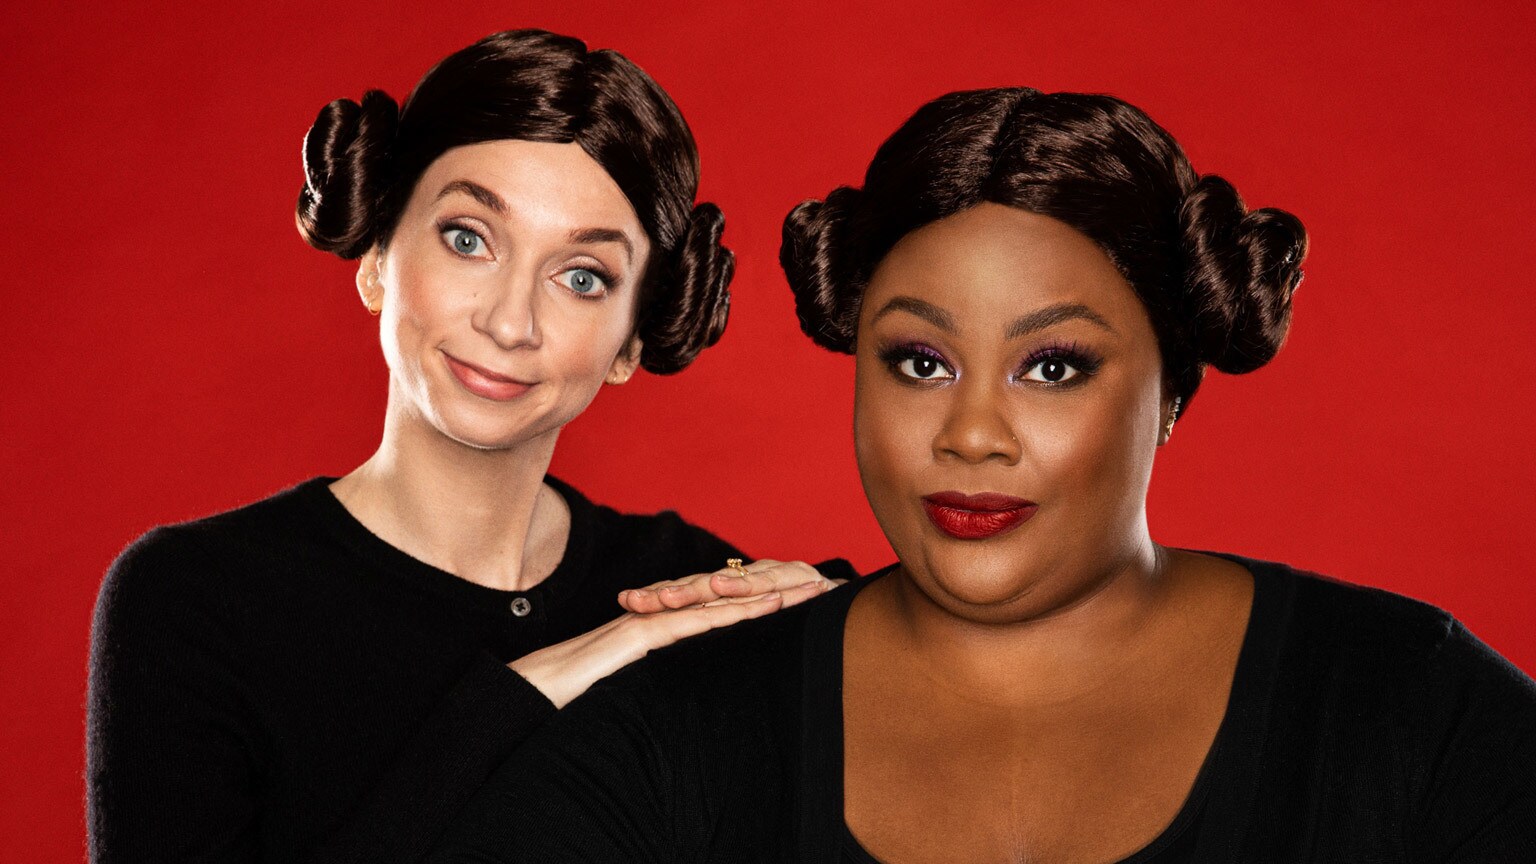 Newcomers Lauren Lapkus and Nicole Byer Take Their First Steps into the Larger World of Star Wars